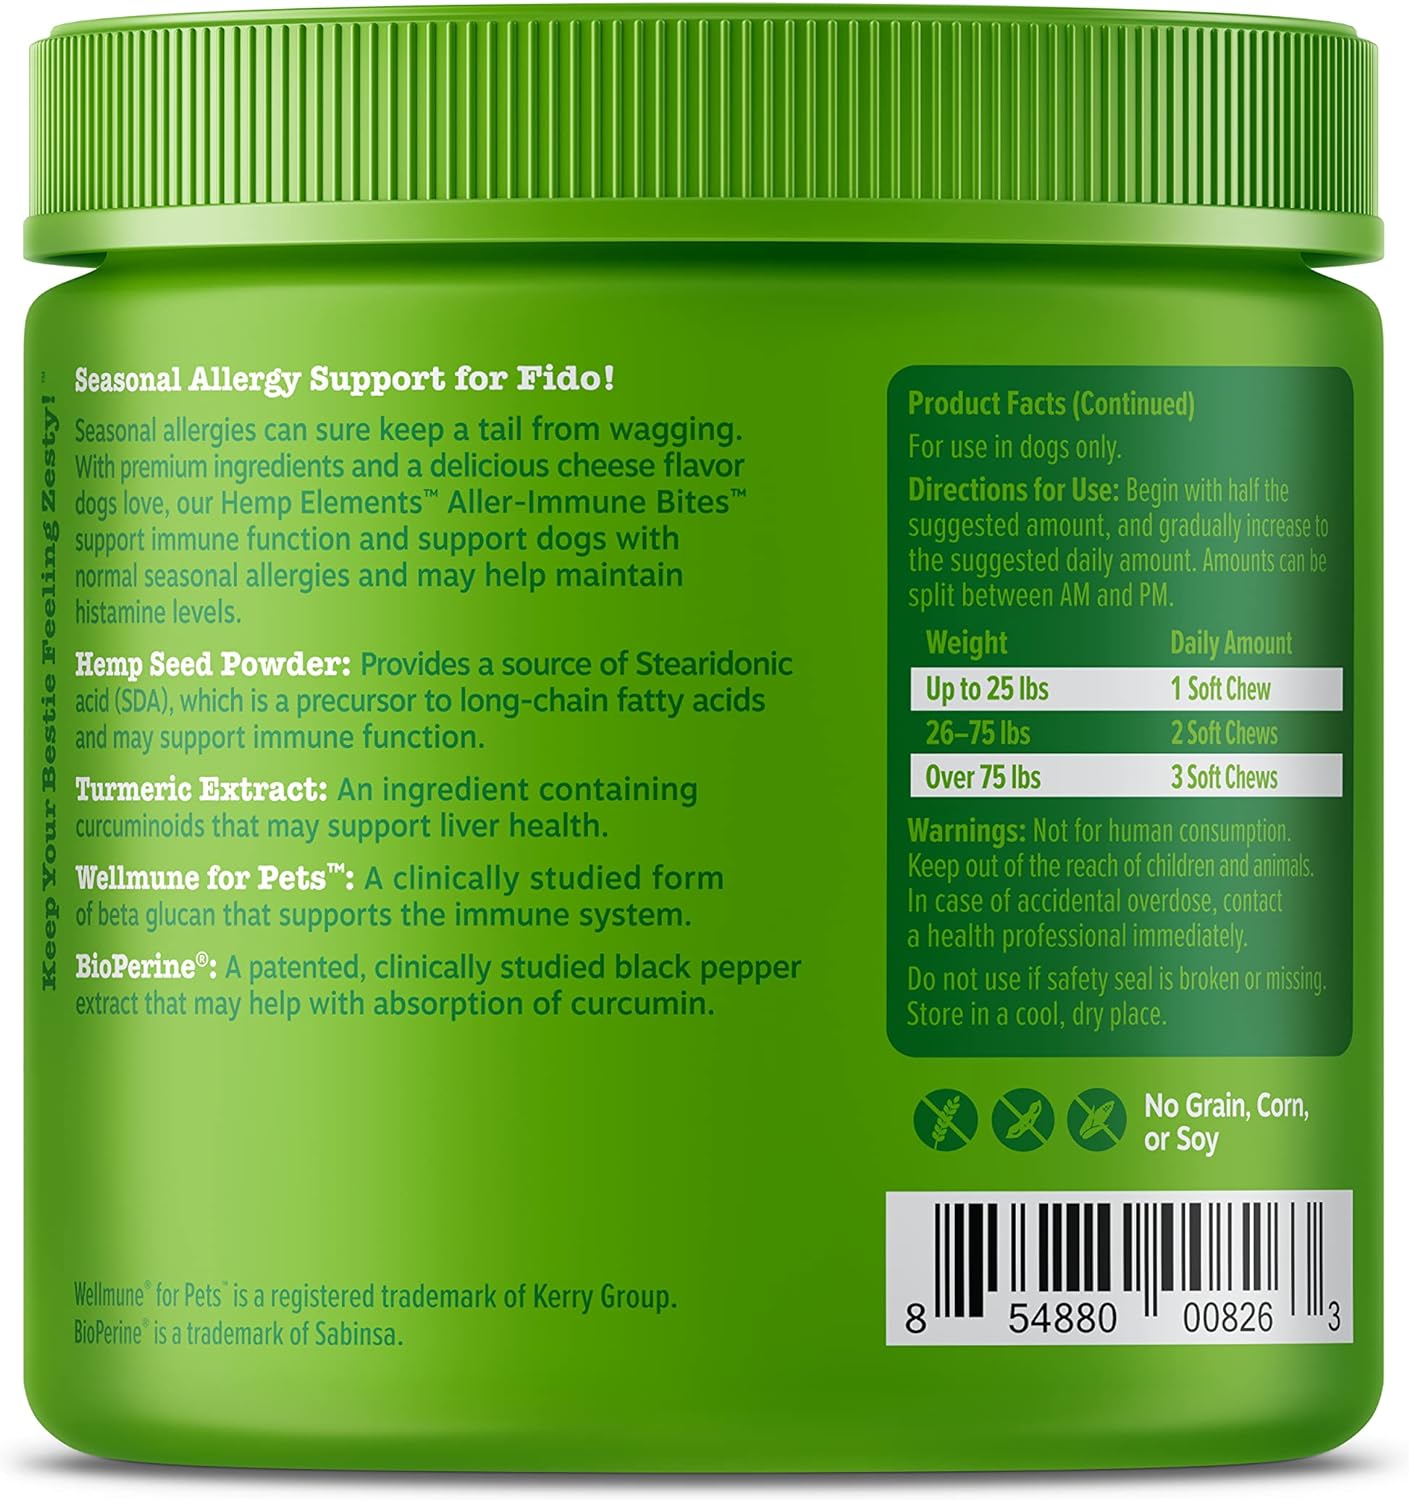 Zesty Paws Dog Allergy Relief - Anti Itch Supplement - Omega 3 Probiotics for Dogs - Salmon Oil Digestive Health - Soft Chews for Skin & Seasonal Allergies - with Epicor Pets – Hemp - 90 Count… : Pet Supplies